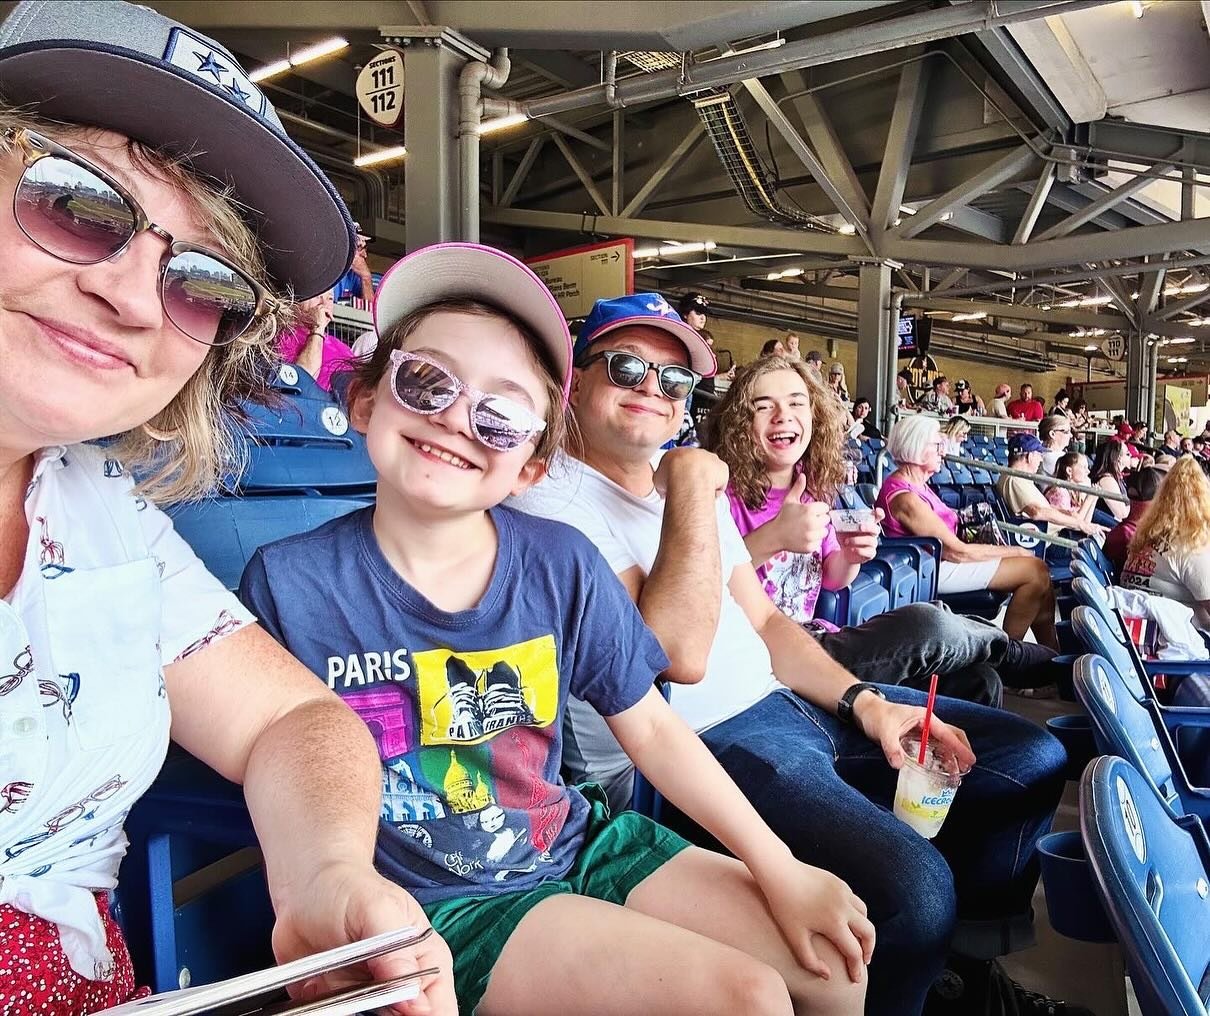 I'll be on the road next weekend for Mother's Day, so we celebrated a week early at the @nashvillesounds this afternoon... Family + Baseball = ❤️! I love these people so much!!